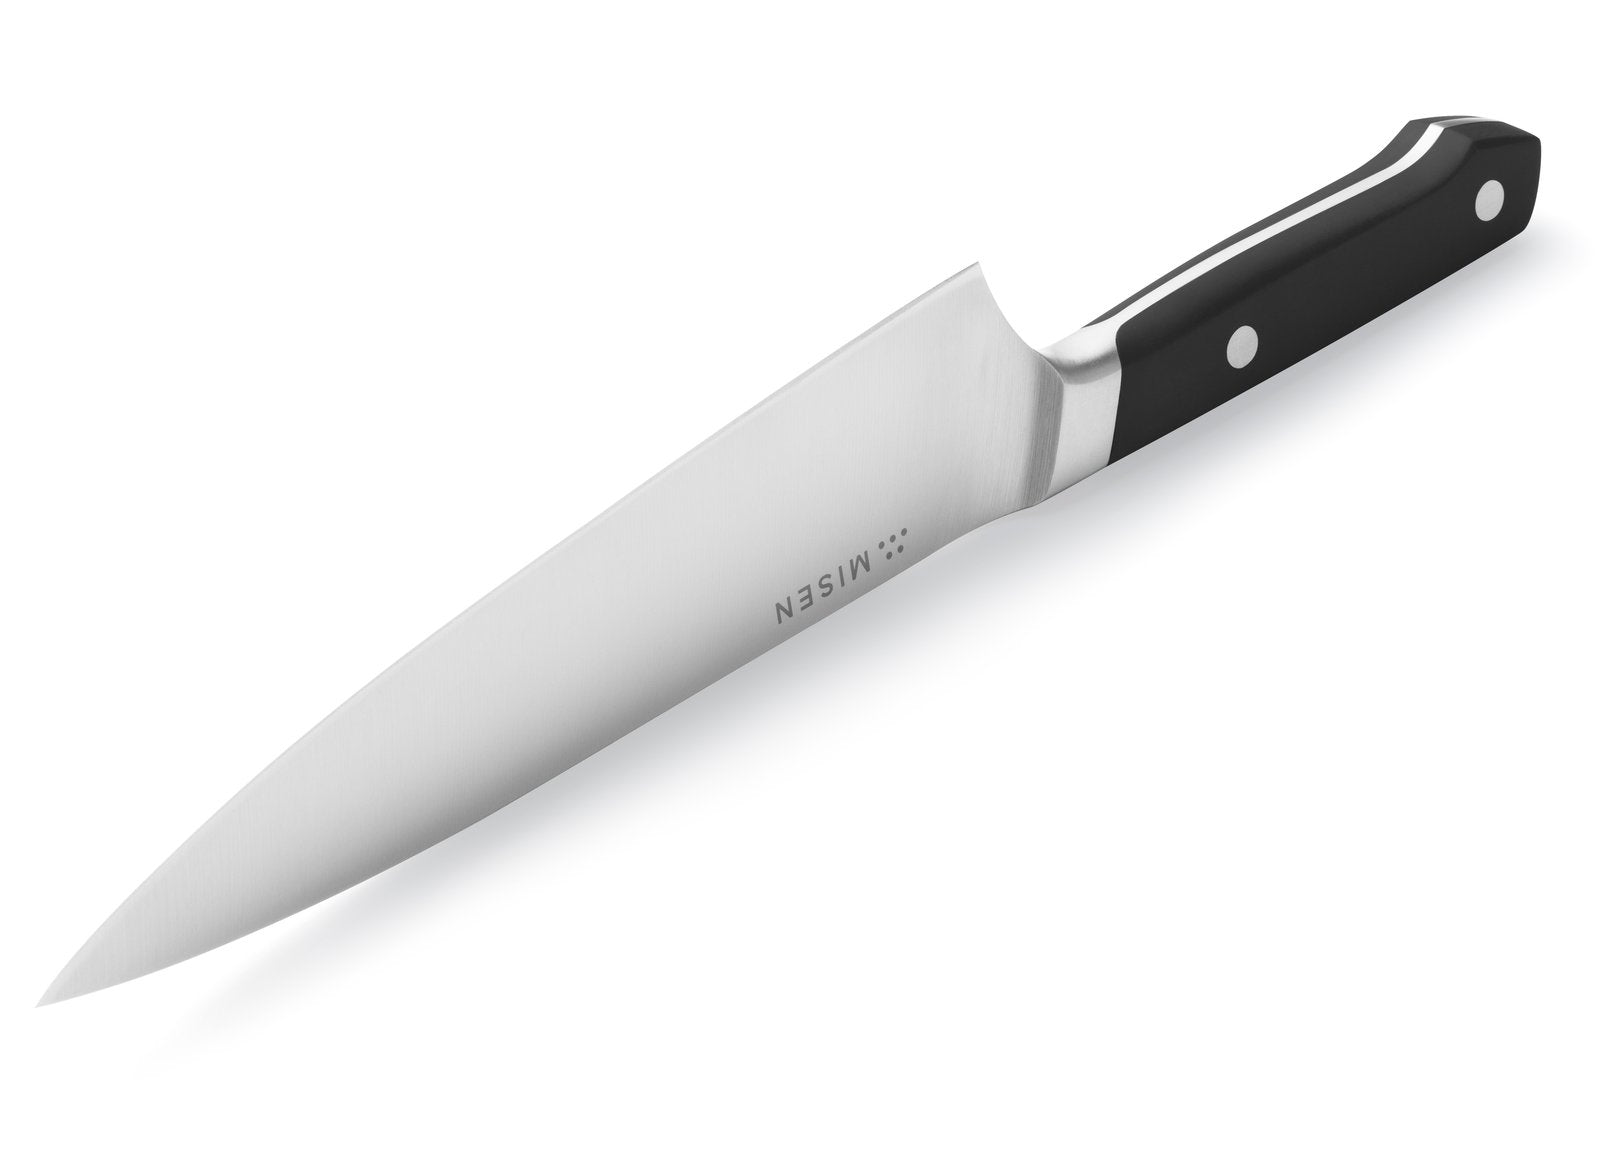 Knife sharpening: The Misen Chef's Knife with the blade facing up